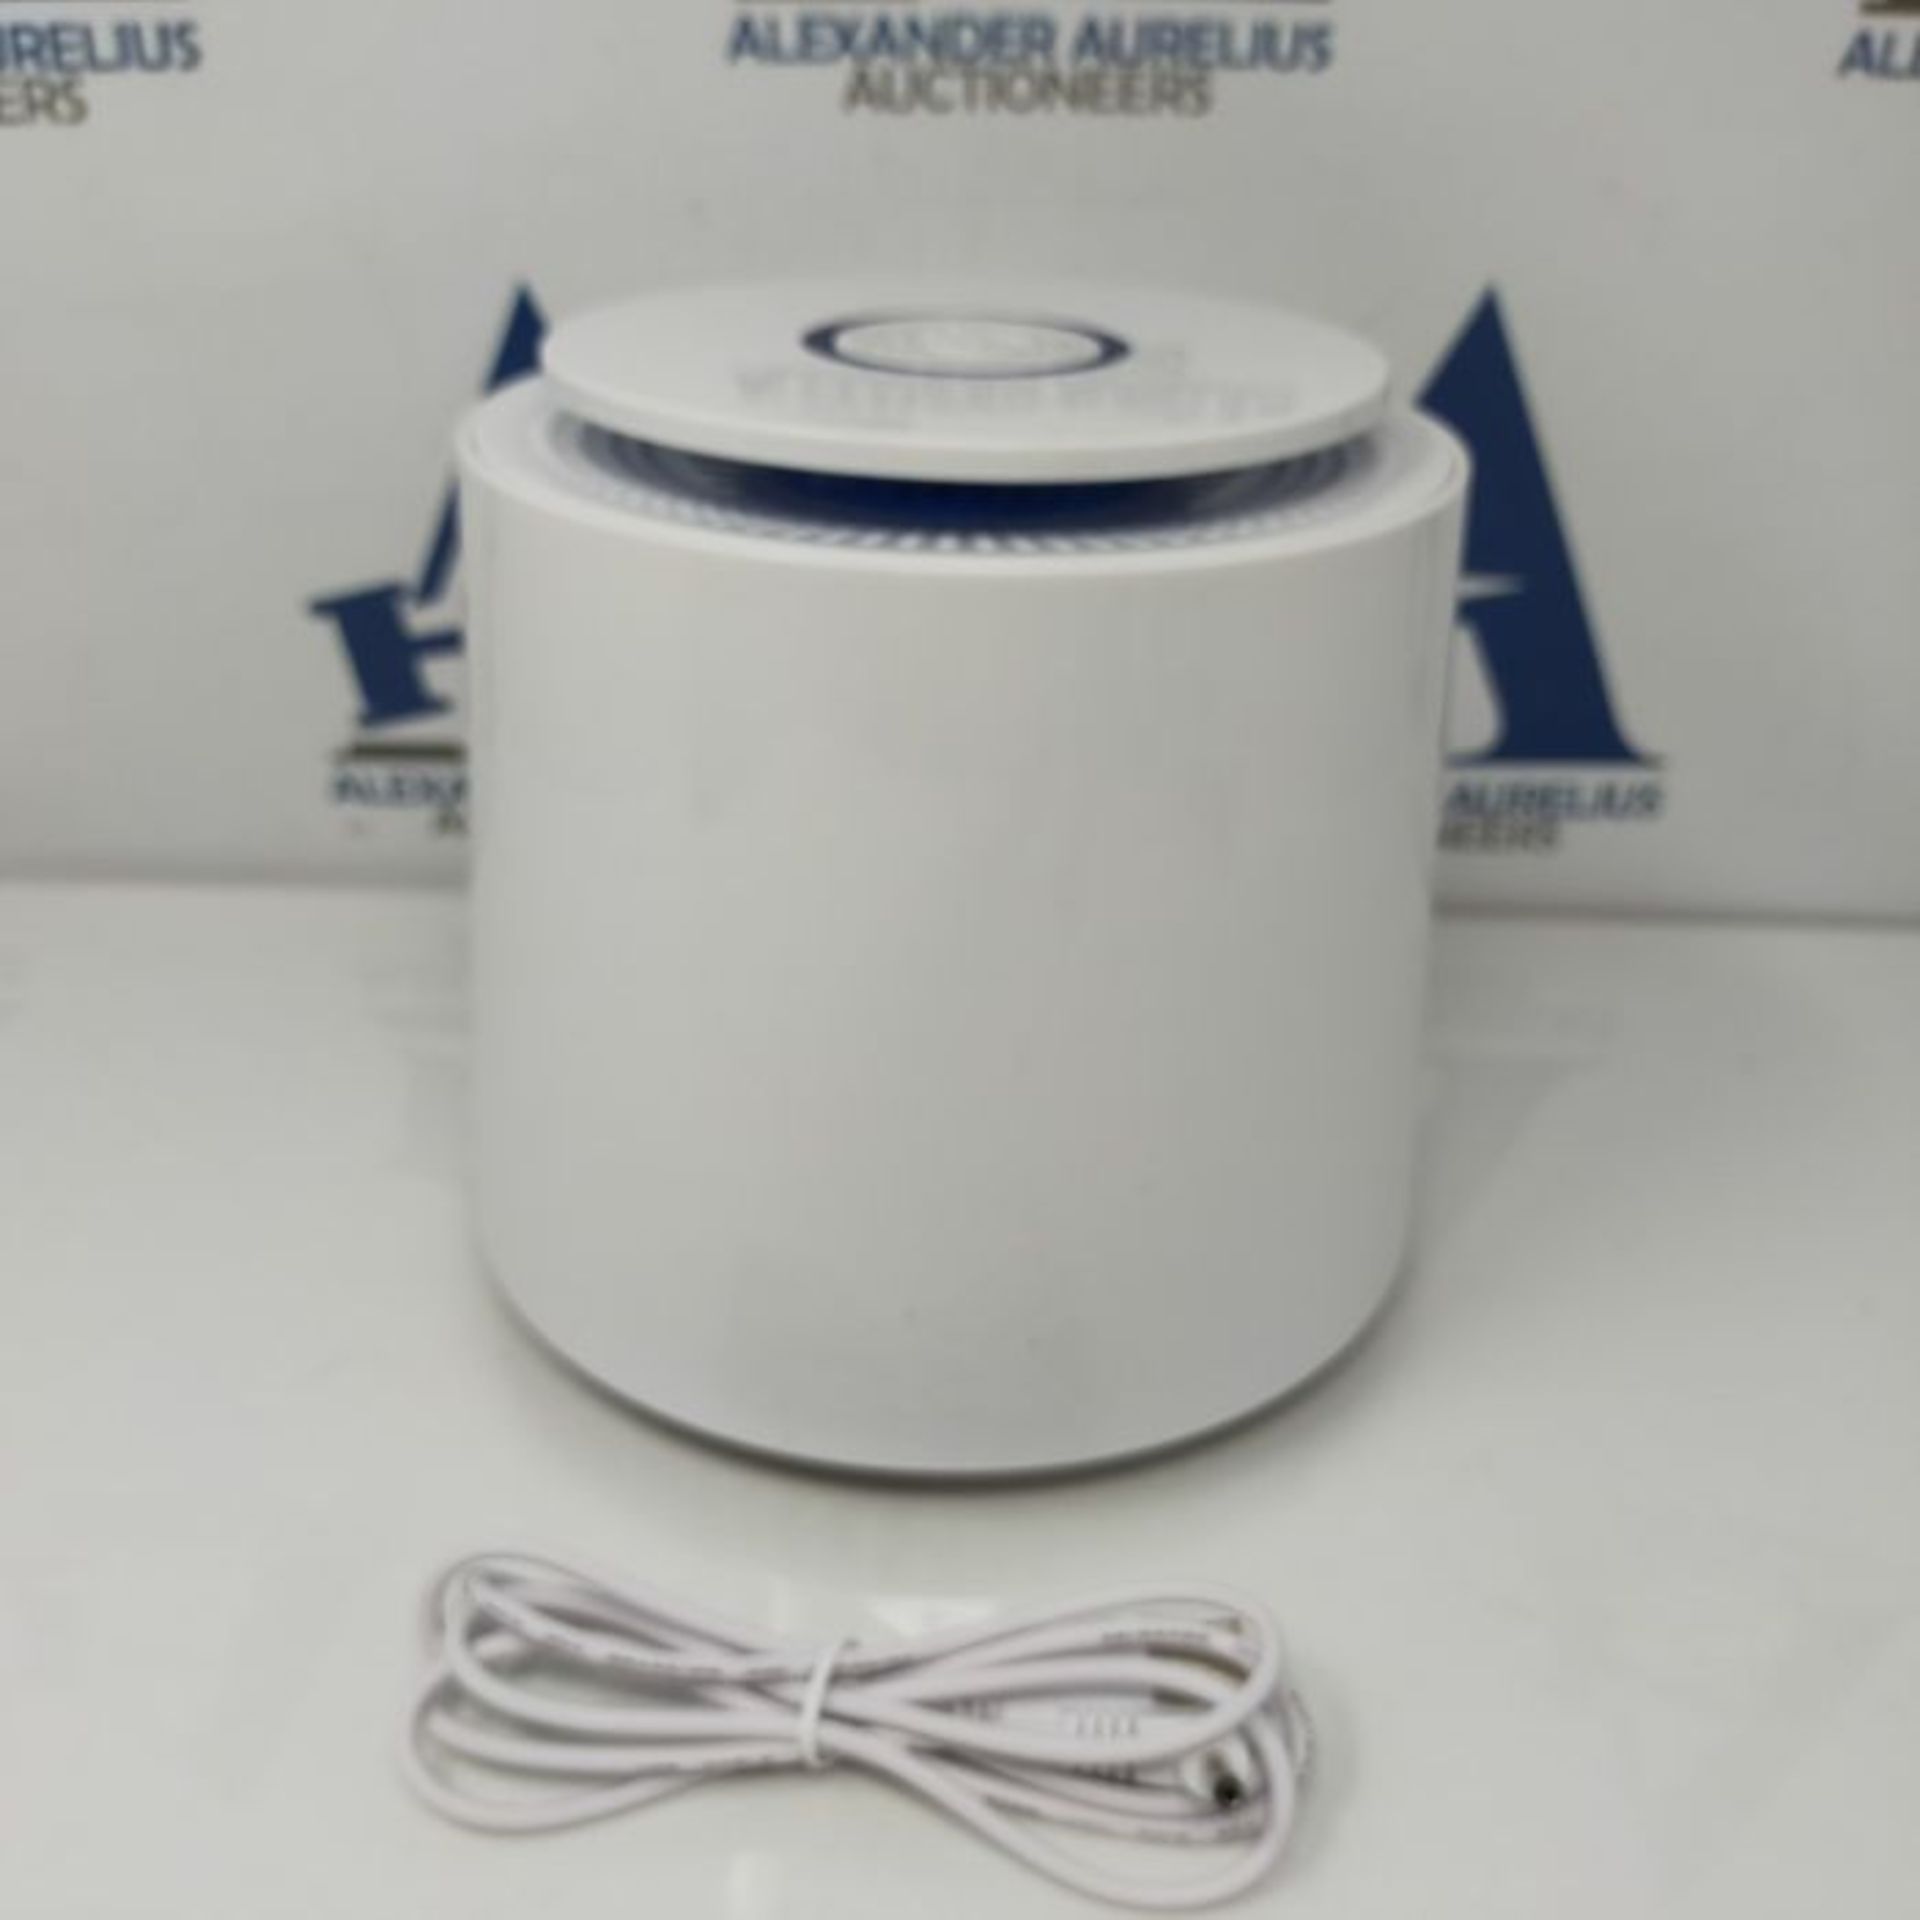 RRP £69.00 Air Purifier 5-in-1 Air Purifiers with 4 Layers True HEPA Filter, Anion,Aromatherapy F - Image 3 of 3